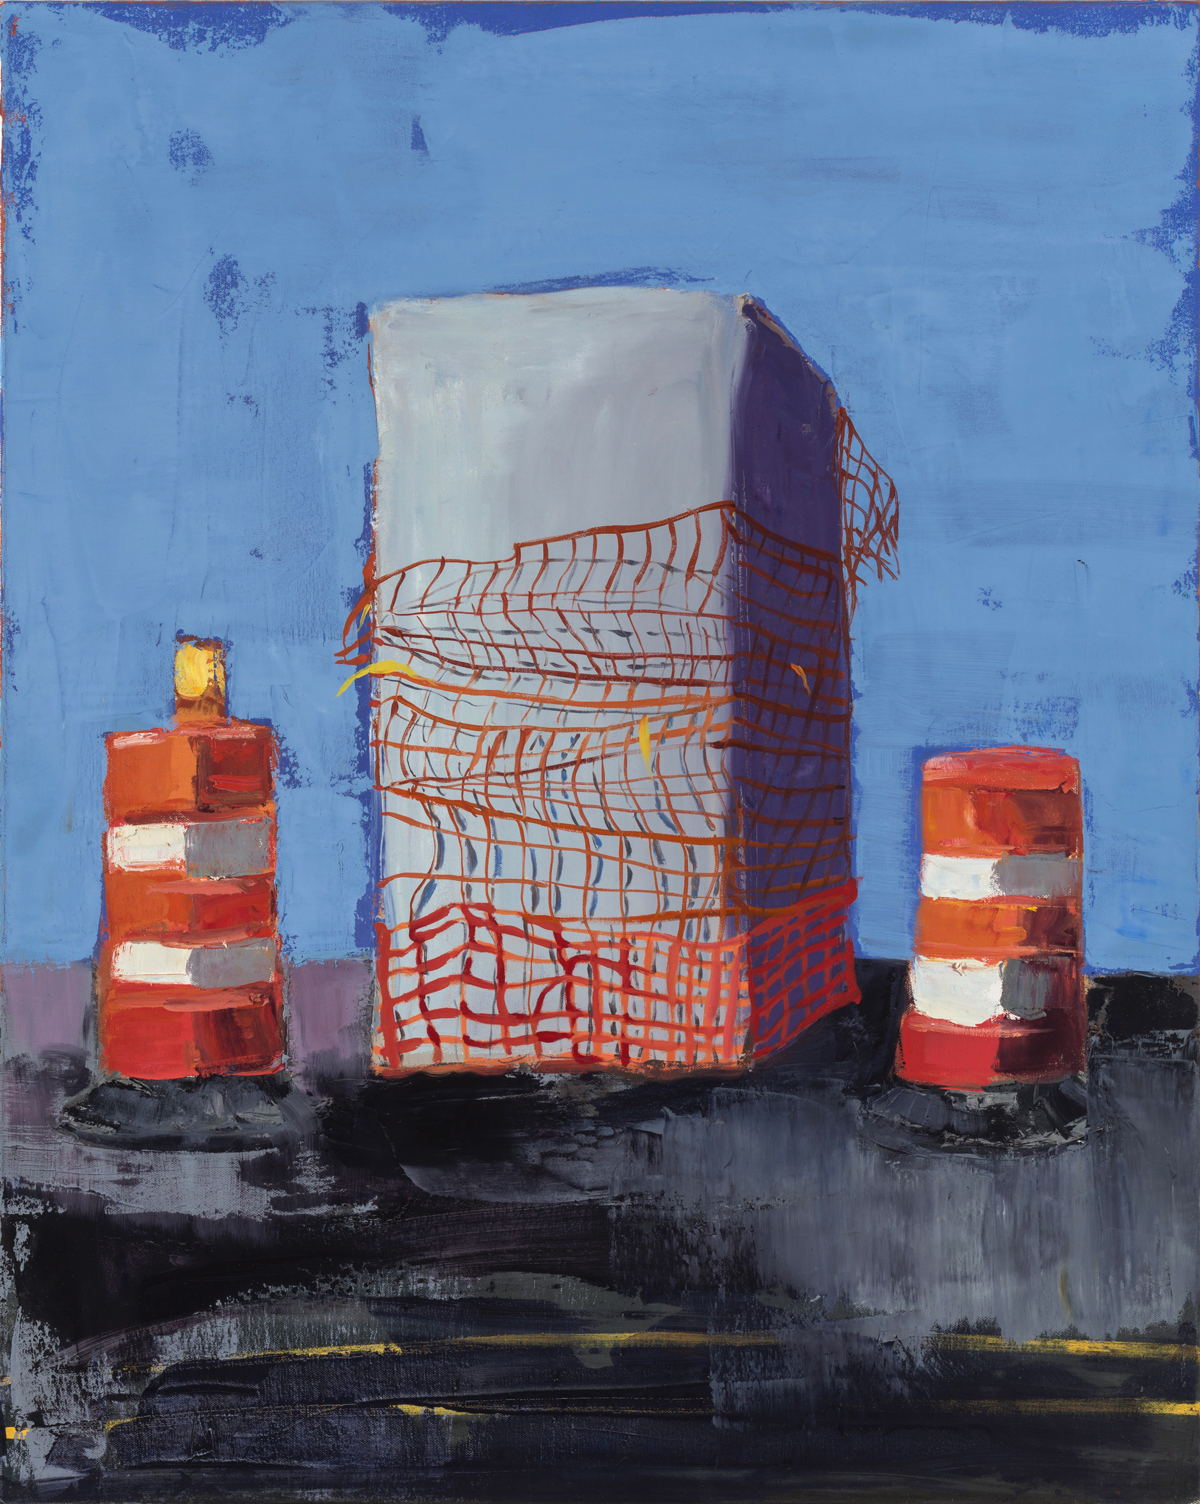 A painting of a building and orange traffic cones

Description automatically generated